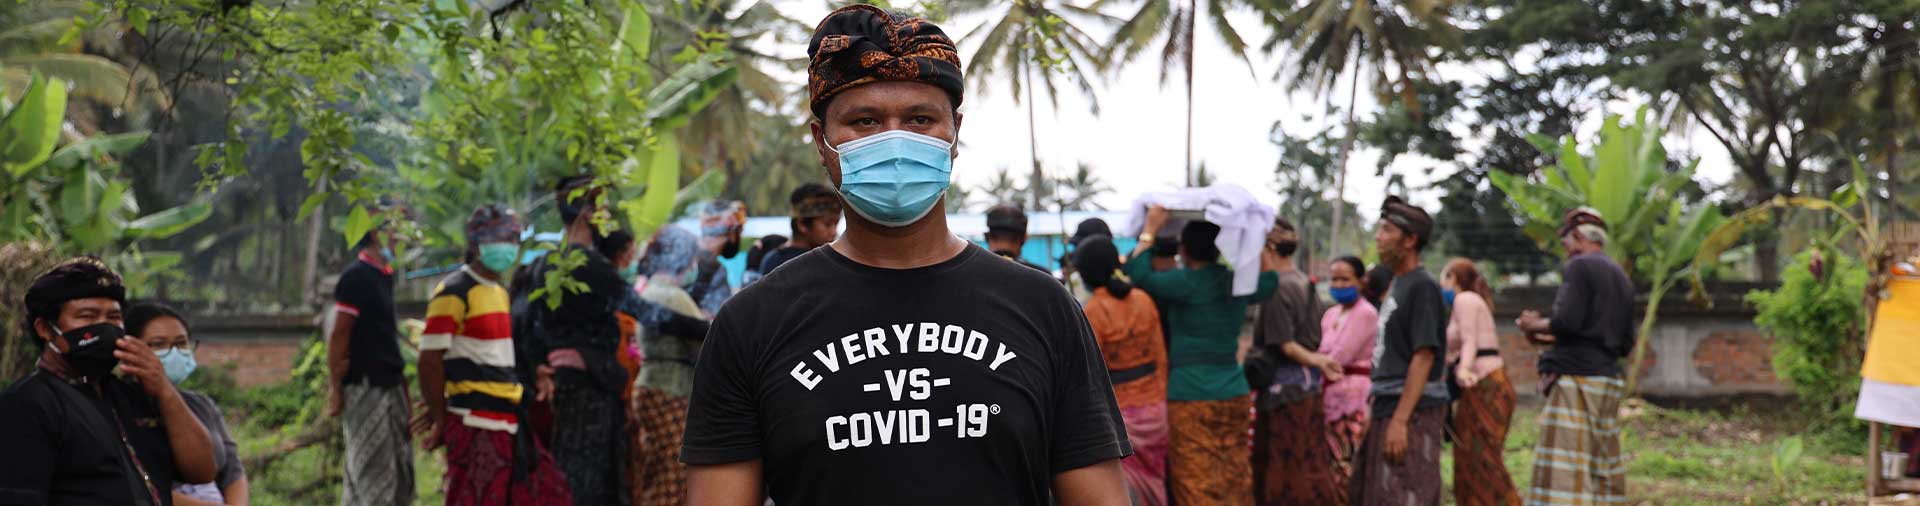 balinese-man-in-mask-wearing-black-everybody-against-covid-t-shirt